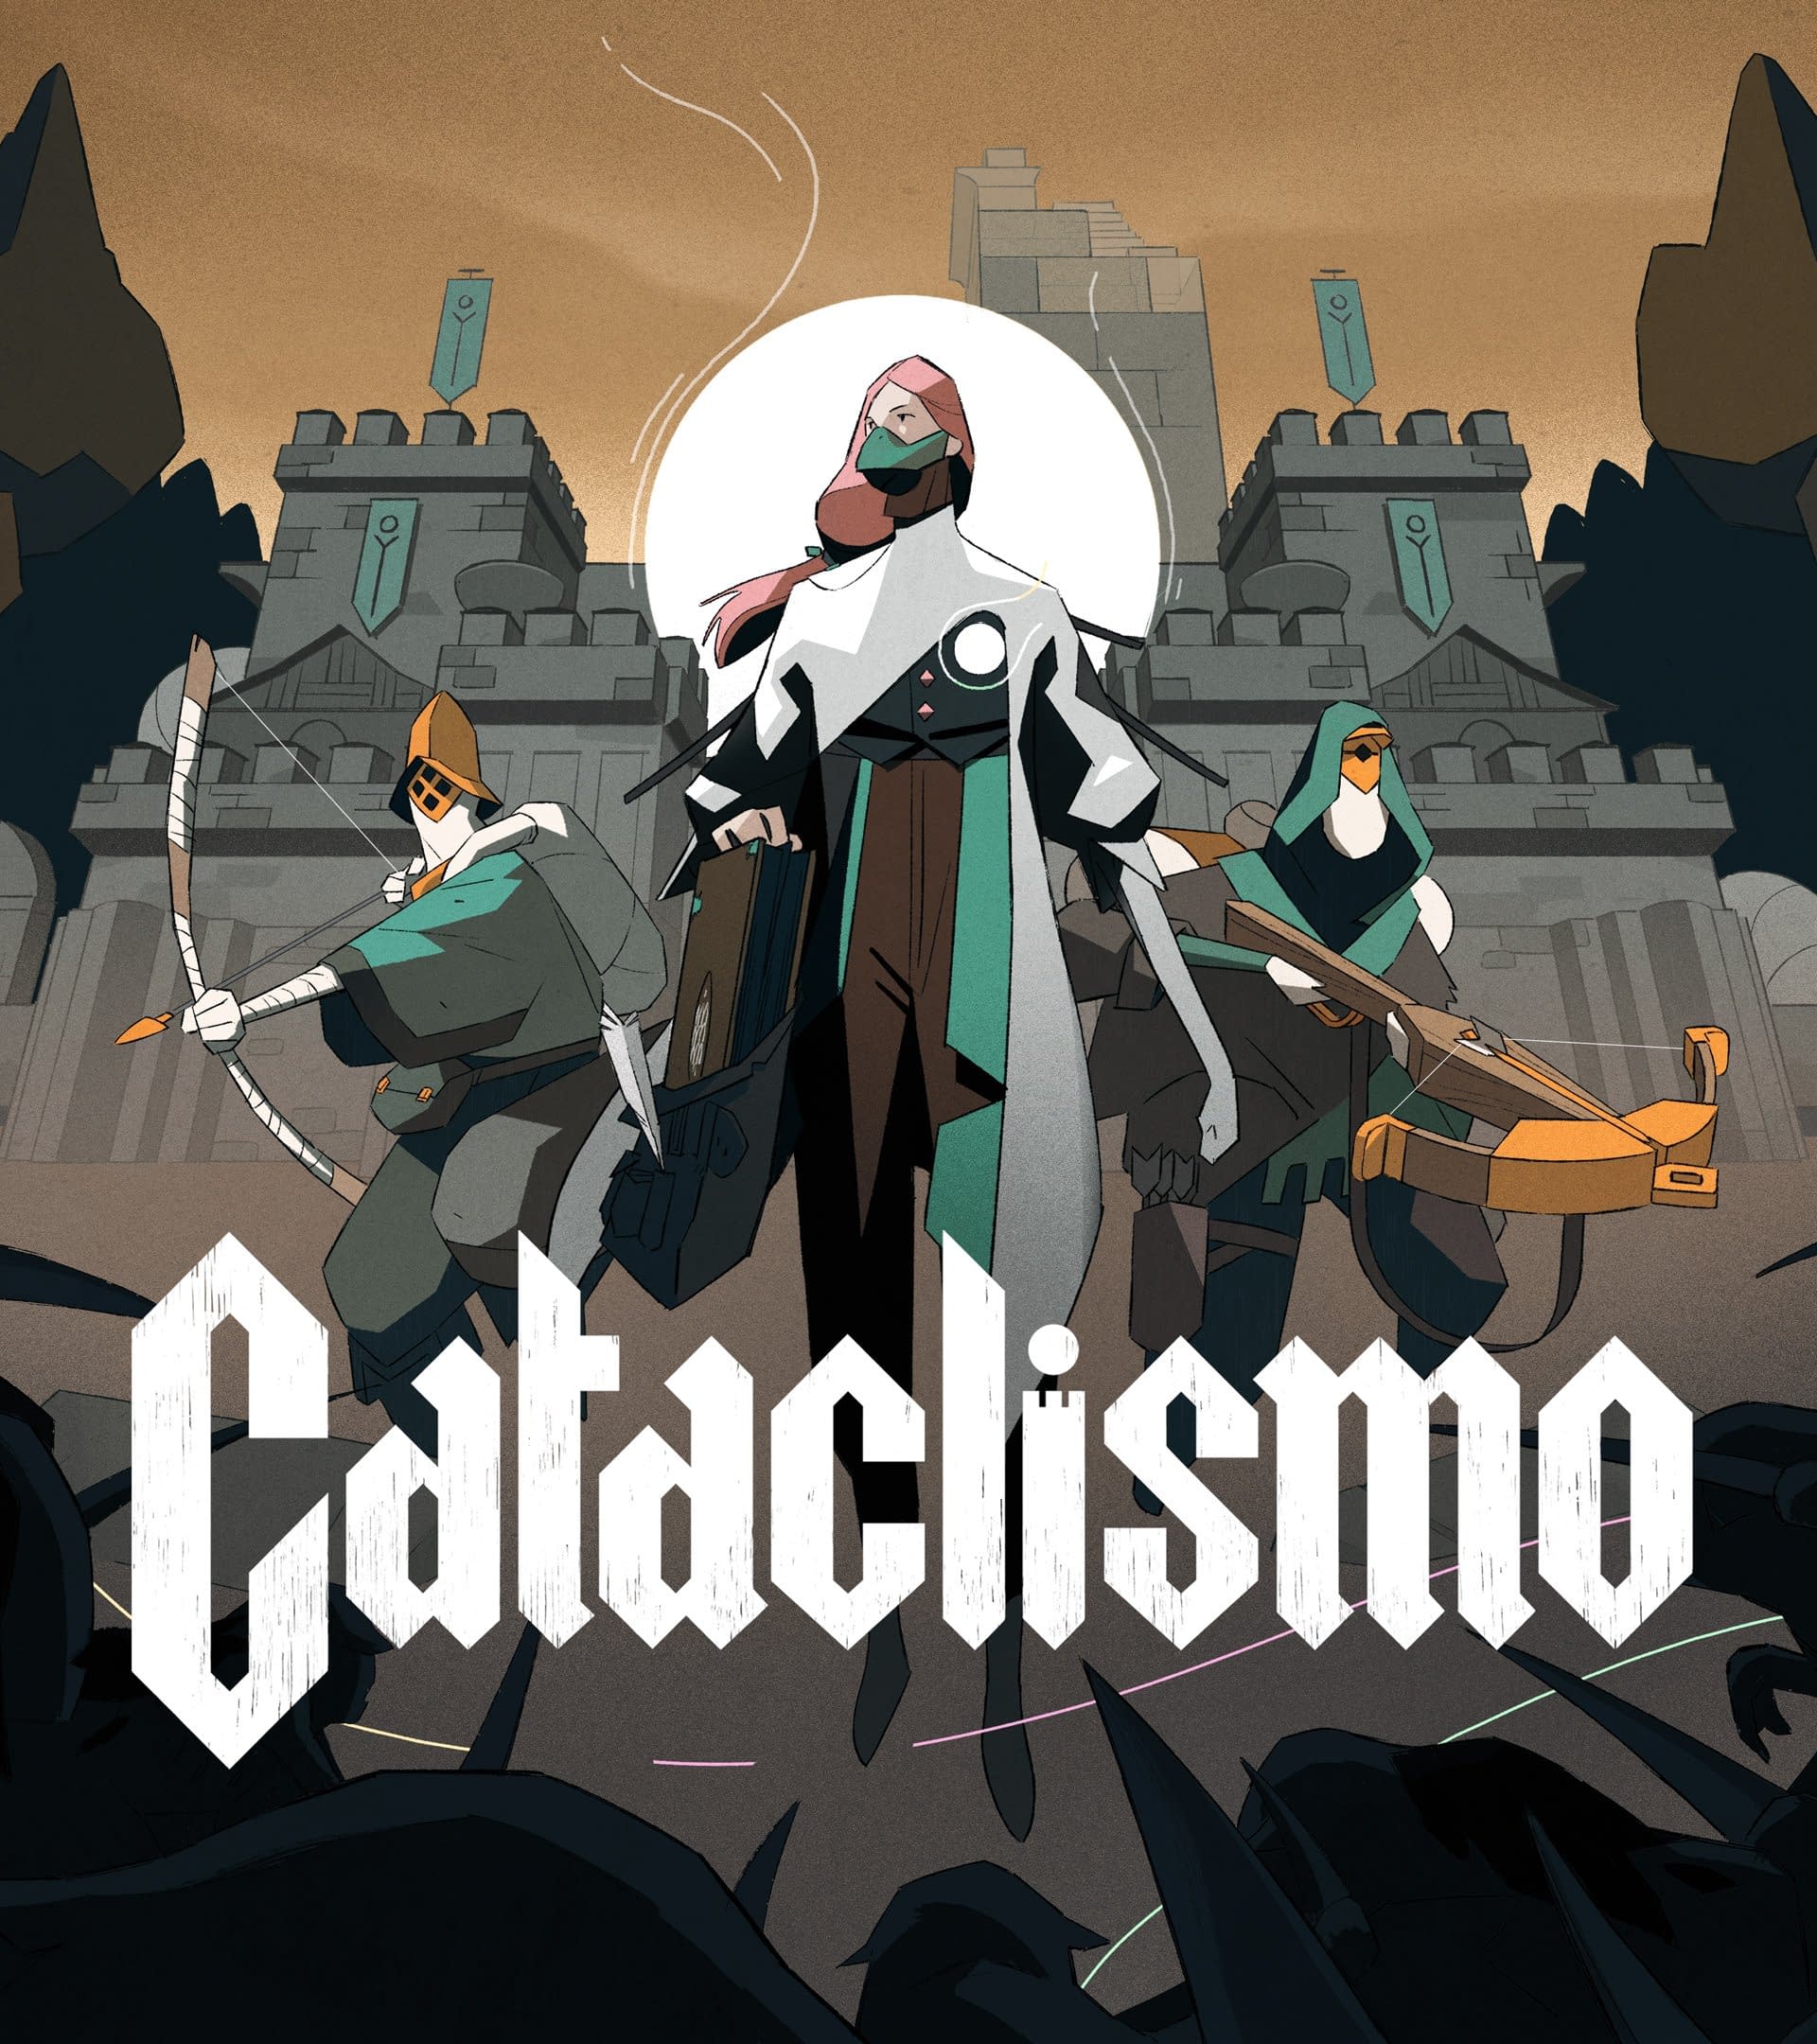 The middle-term theme strategy game from the Munlighter developer comes Cataclismo